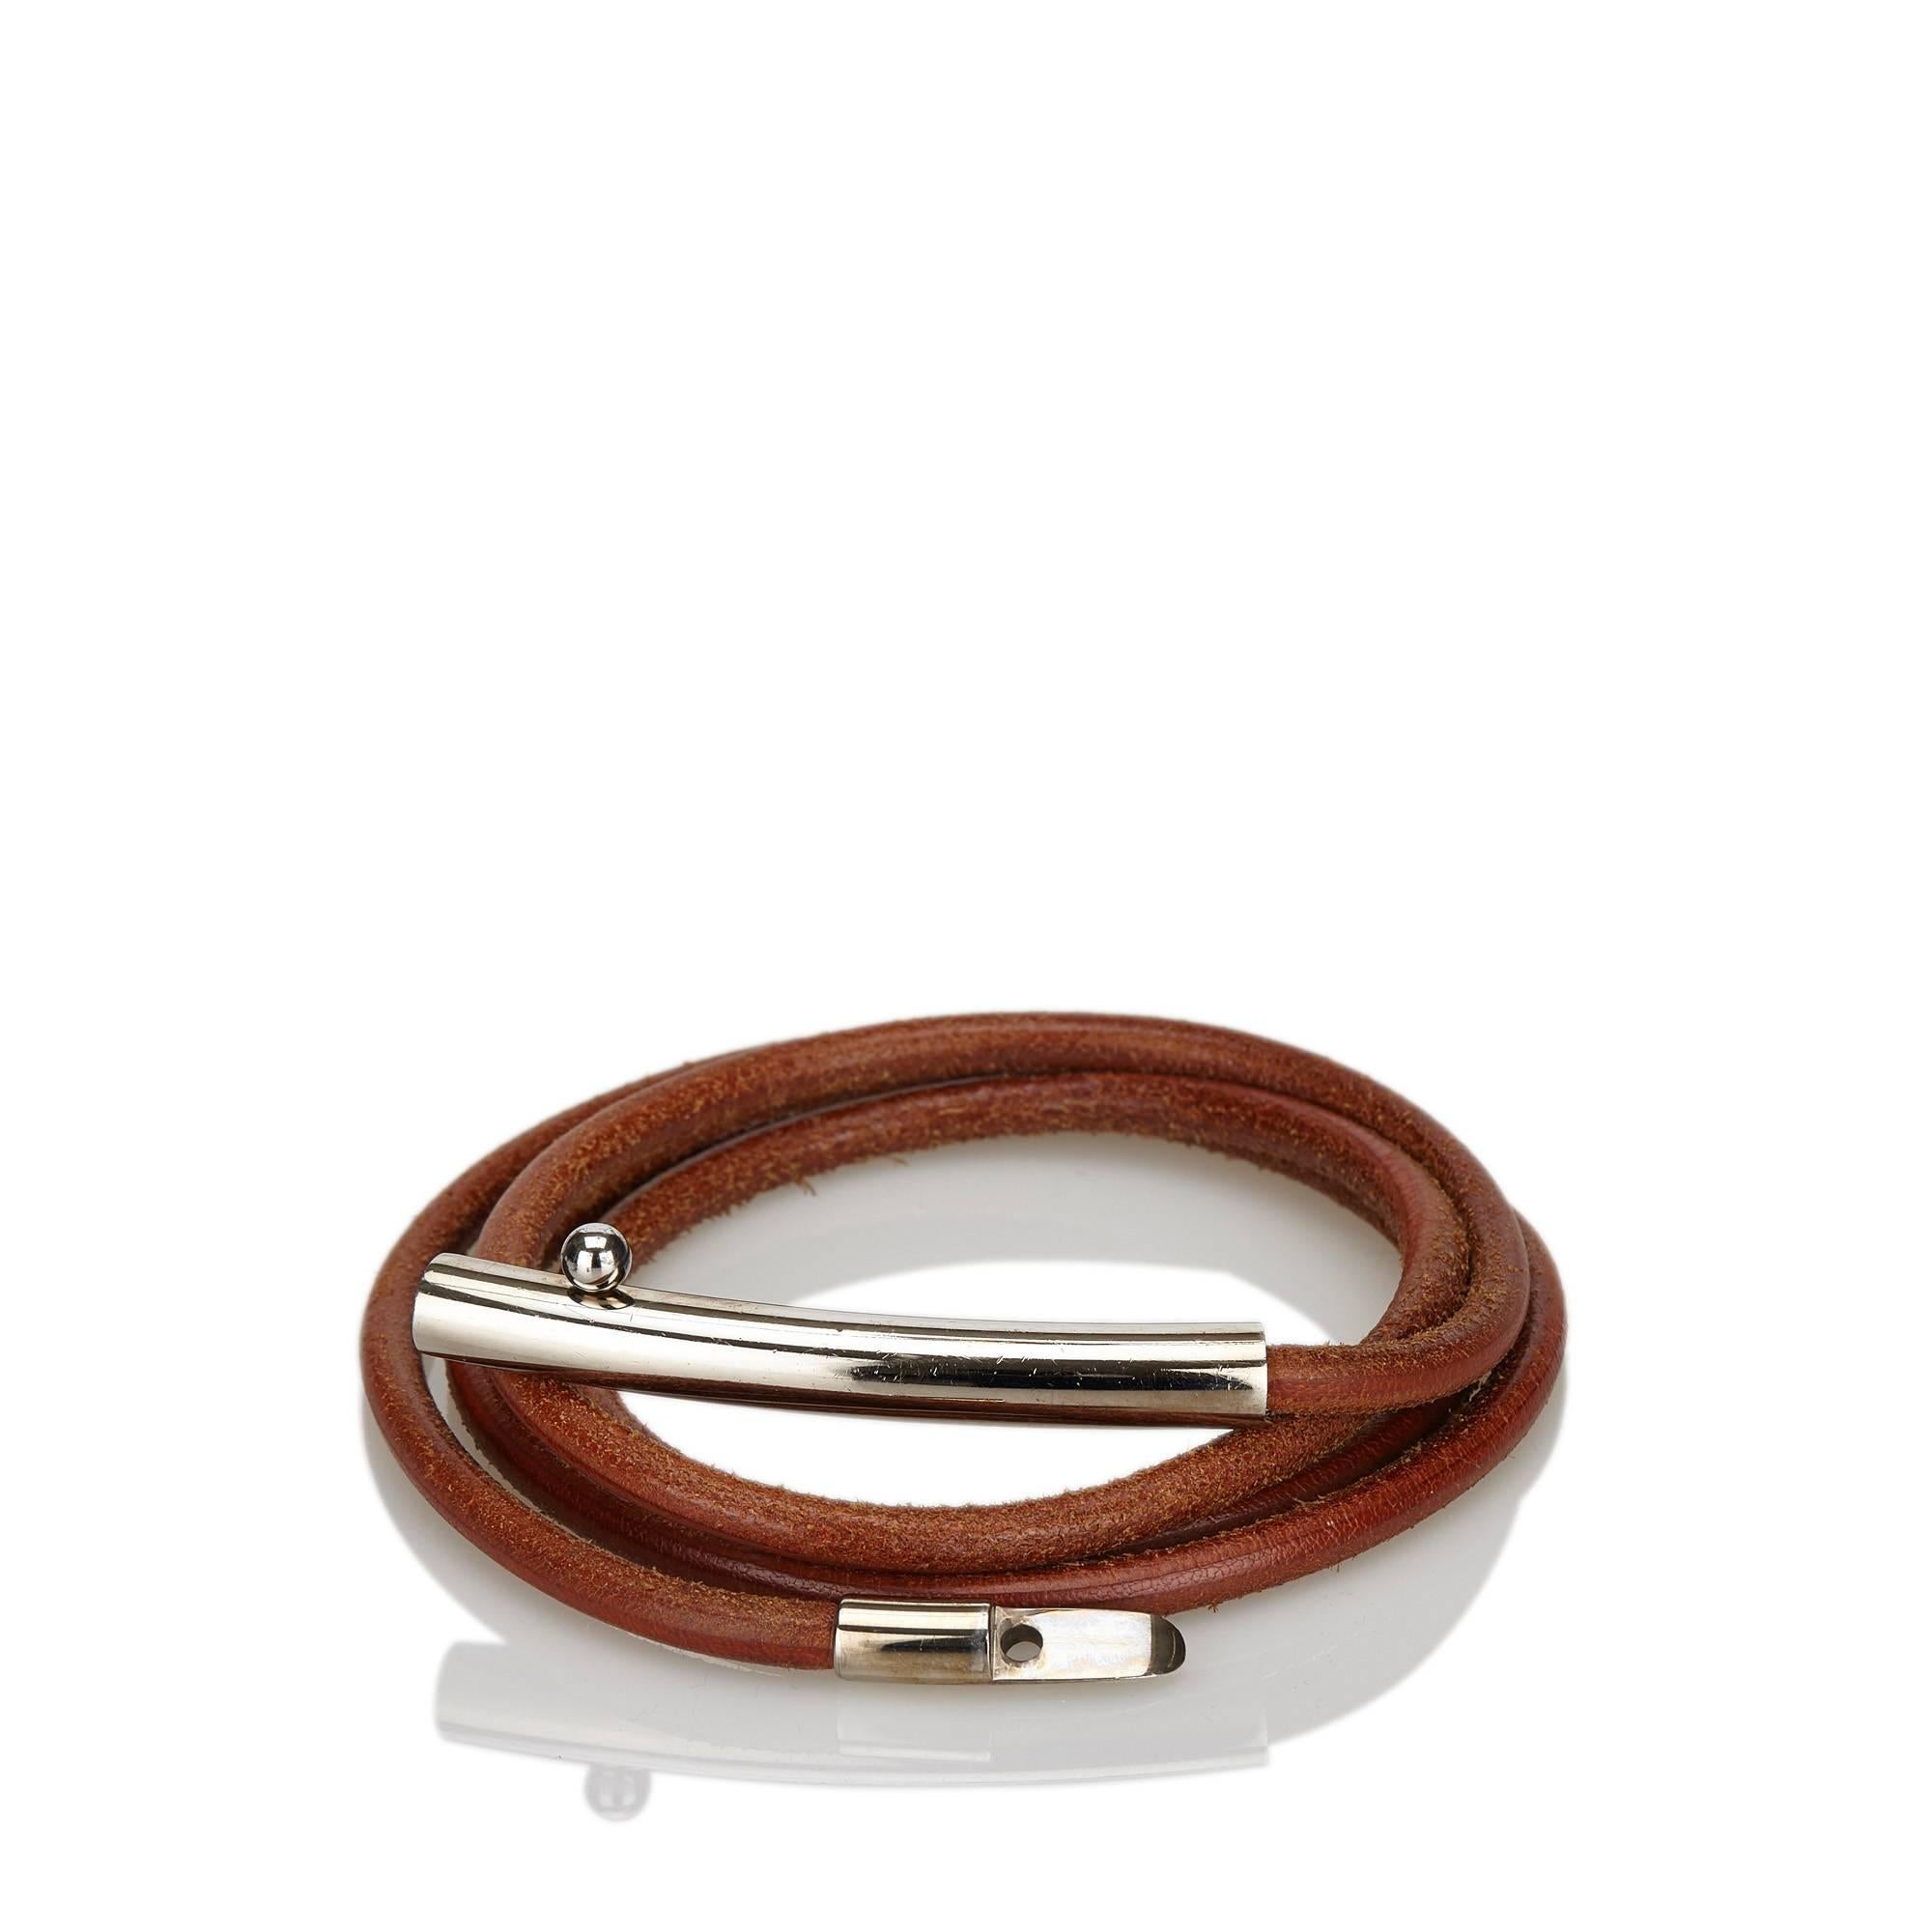 Product details:  Brown rolled leather belt by Hermès.  Clasp closure.  Silvertone hardware.  63